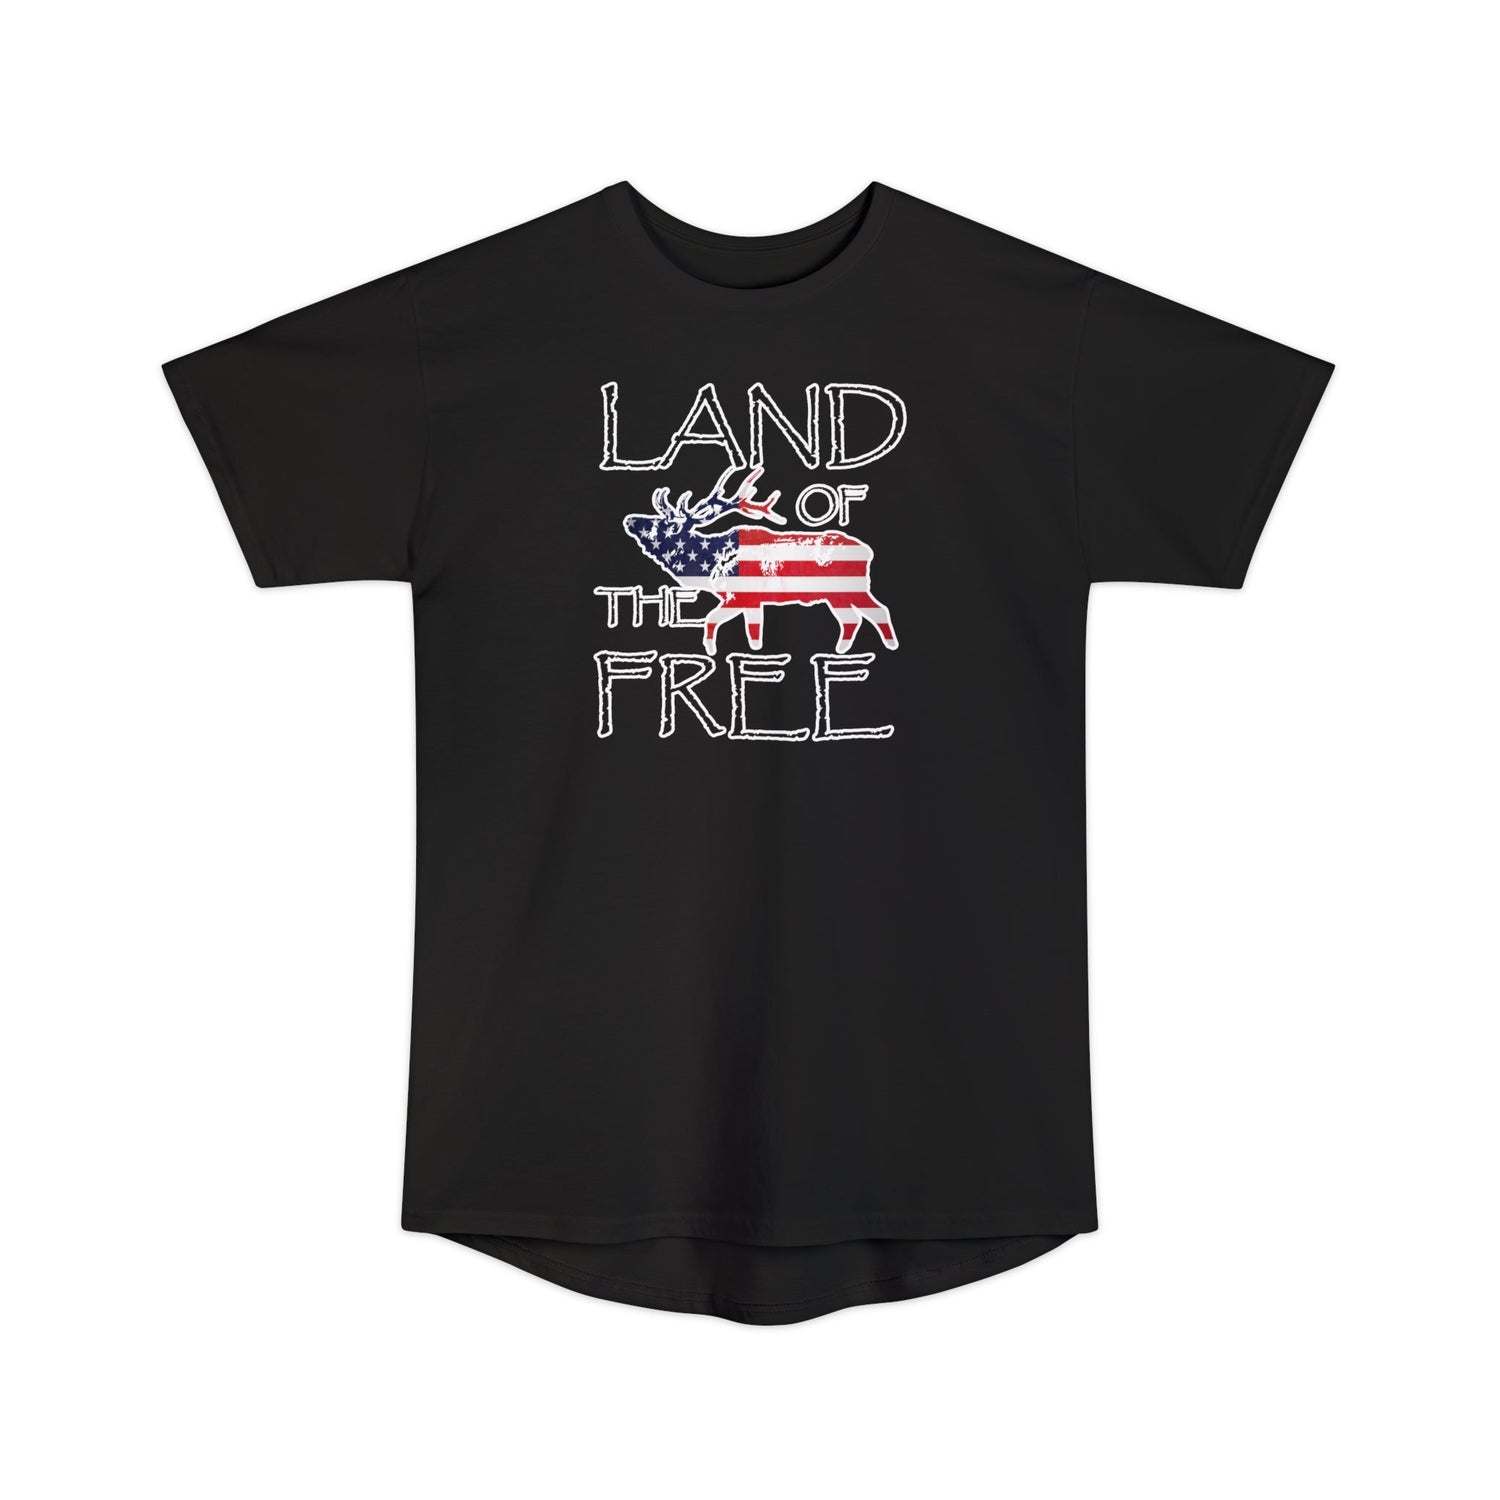 Athletic tall patriotic elk hunting t-shirt, color black, front design placement